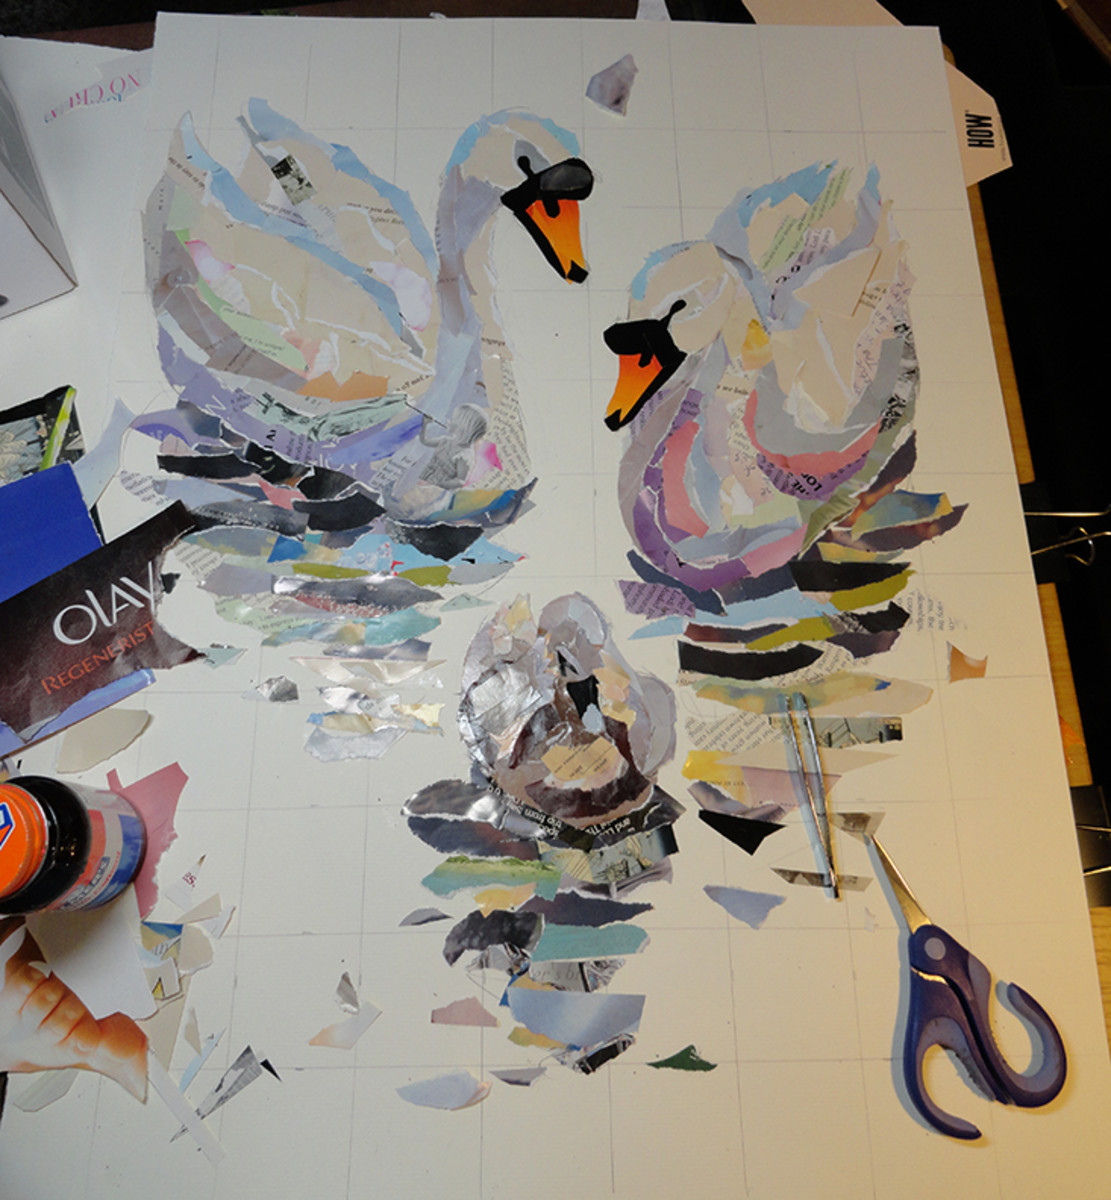 Photo of the progress of the collage